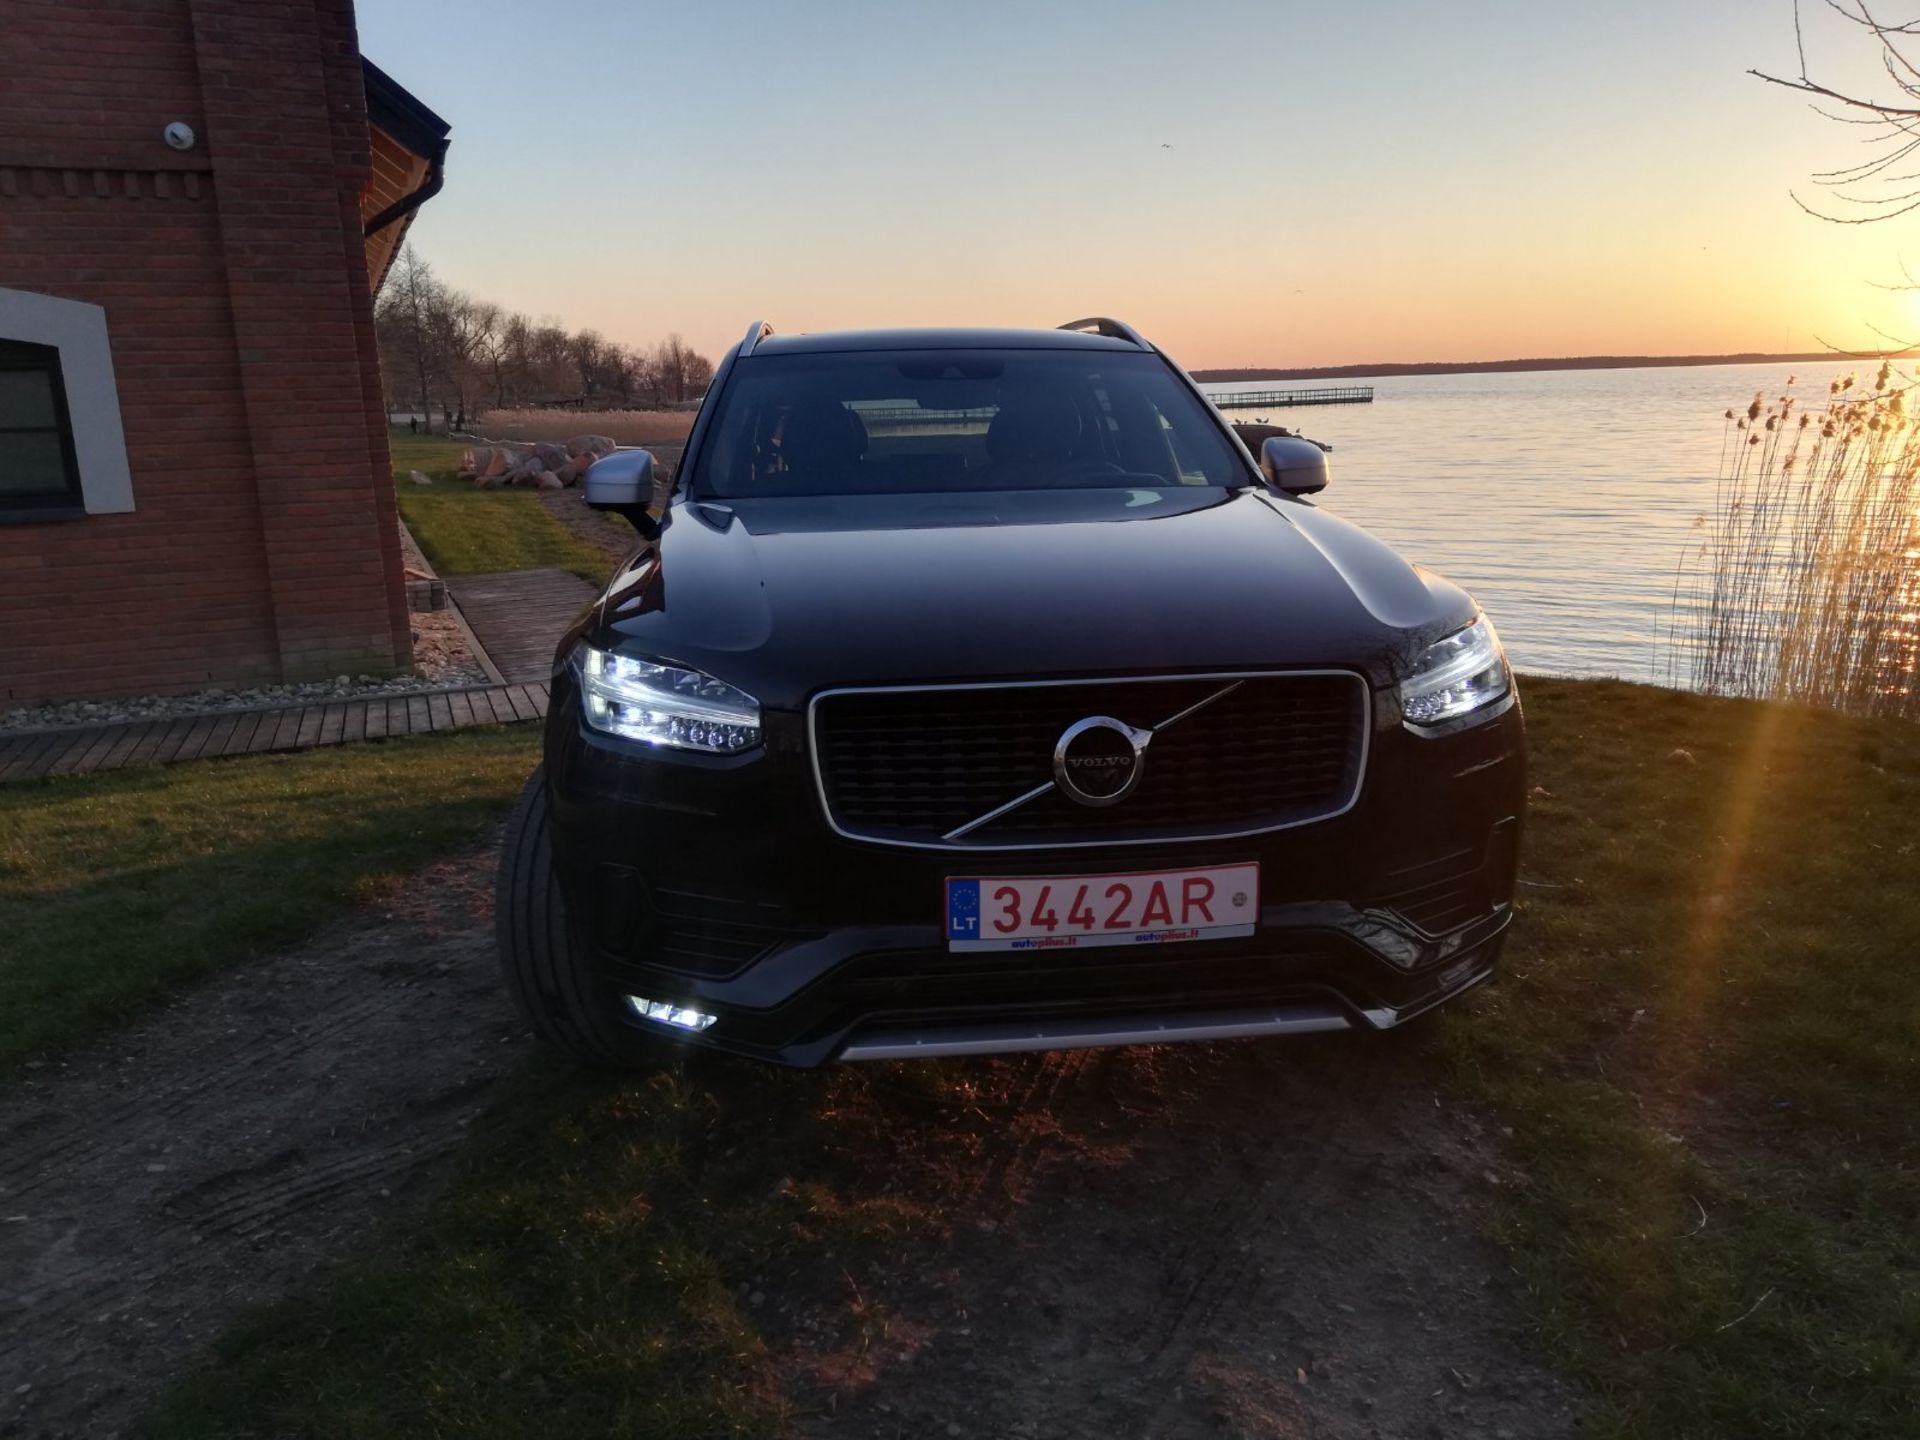 2017 VOLVO XC90 T6 AWD LEFT HAND DRIVE R-DESIGN 2.0L PETROL AUTOMATIC, 45,000 KM, DRIVES LIKE NEW - Image 4 of 20